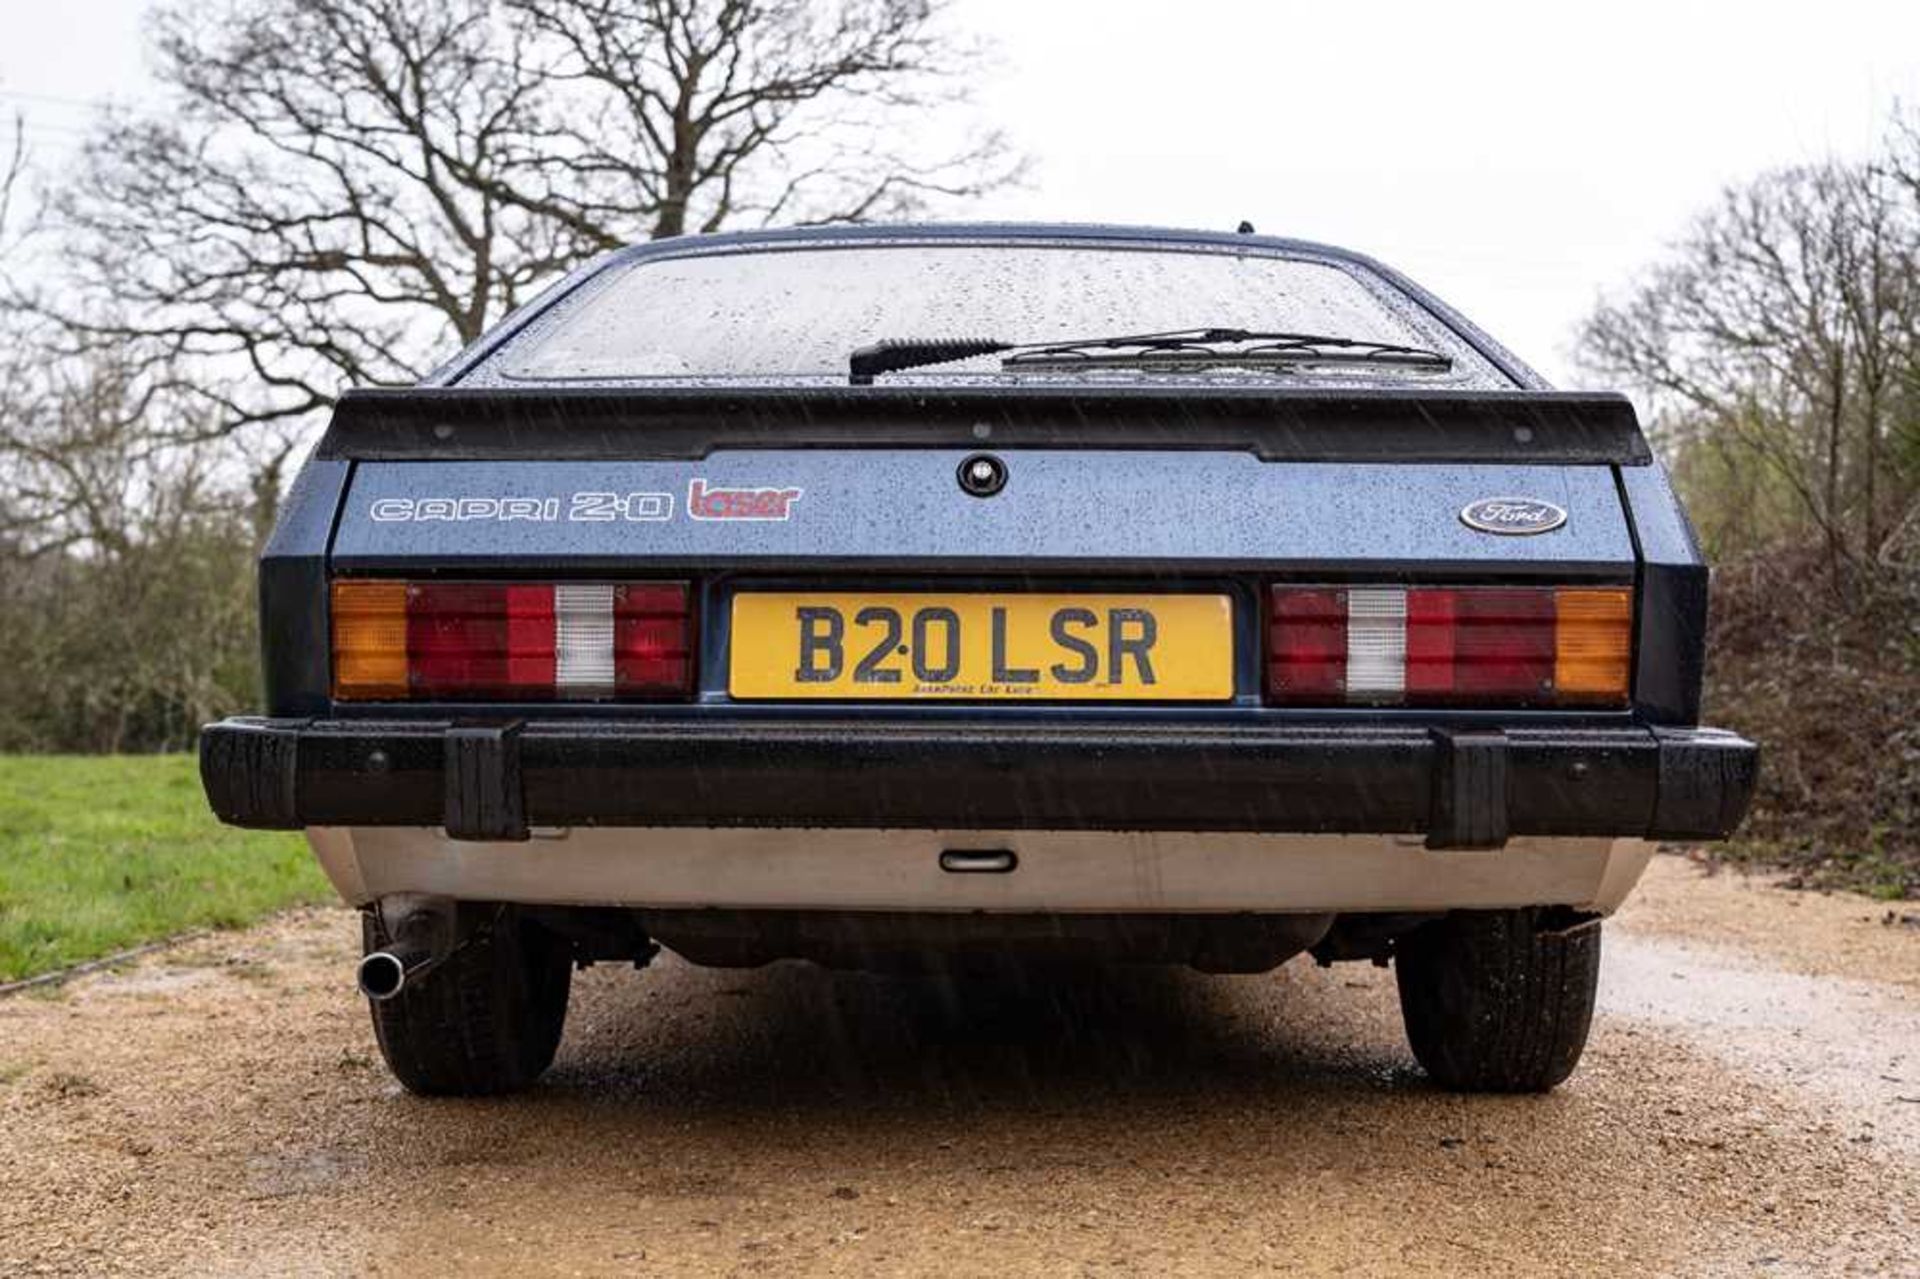 1985 Ford Capri Laser 2.0 Litre Warranted 55,300 miles from new - Image 7 of 67